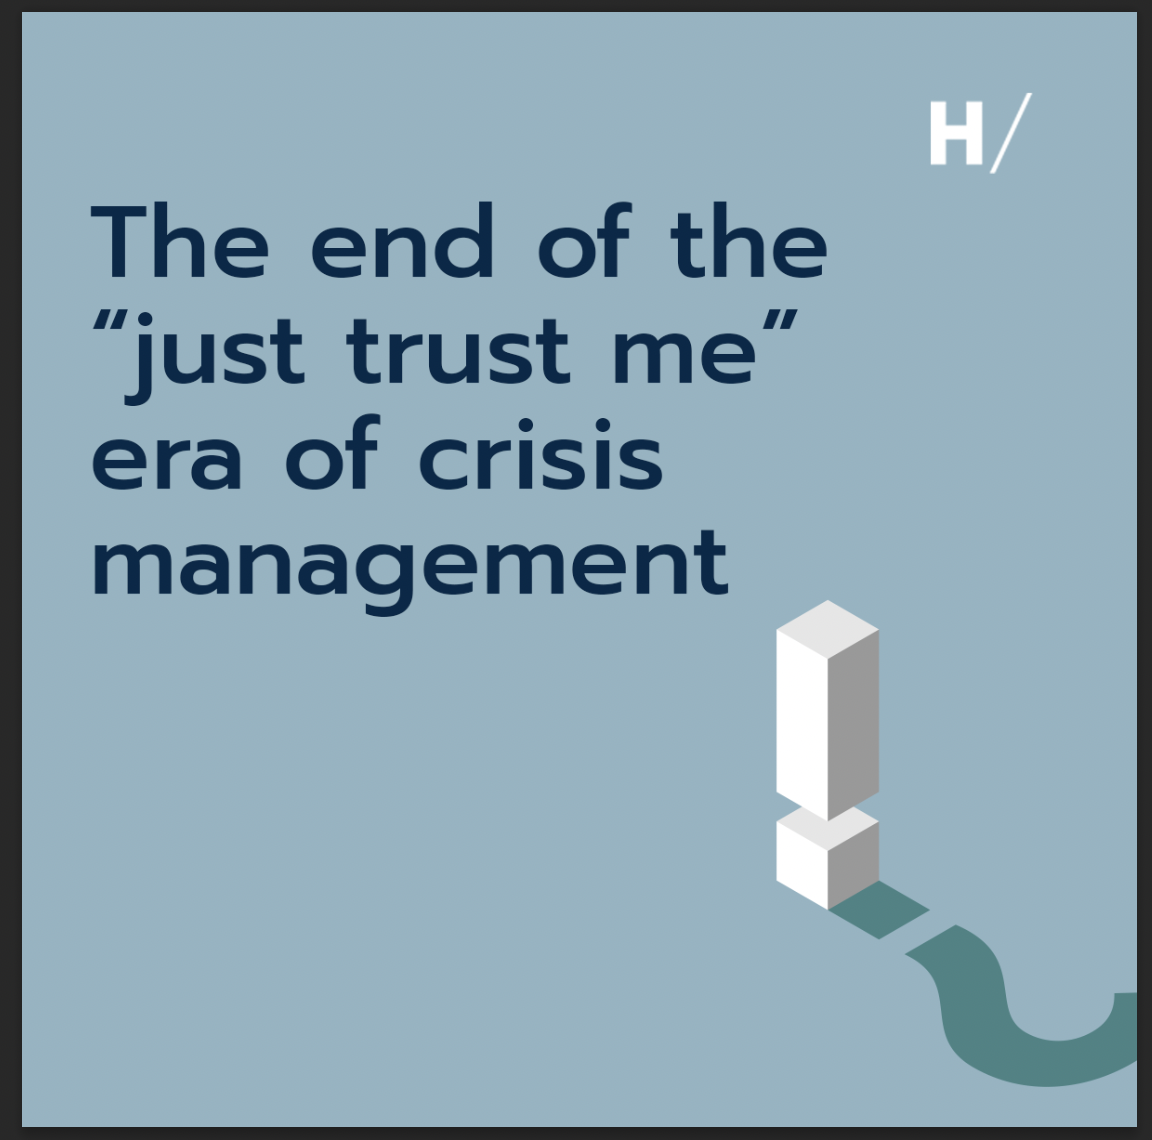 The end of the “just trust me” era of crisis management